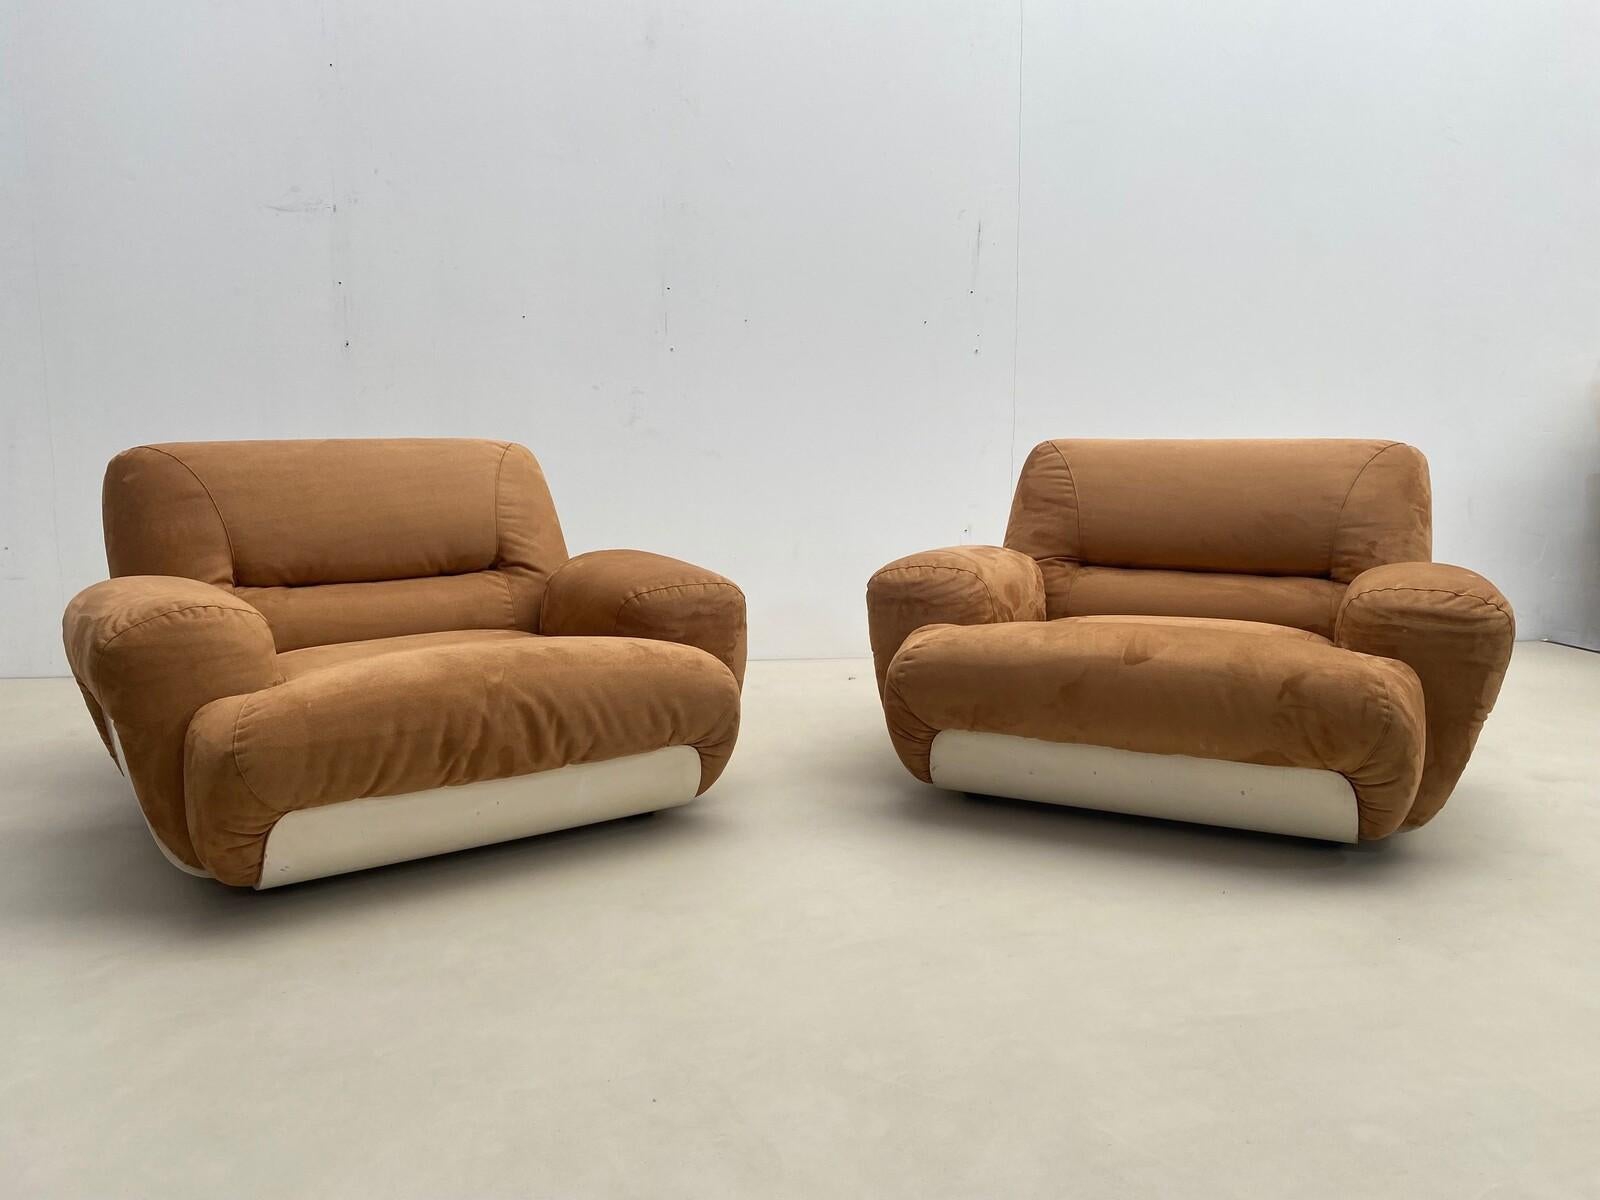 Late 20th Century Pair of Mid-Century Modern Nubuck Leather Lounge Chairs, Italy, 1970s For Sale